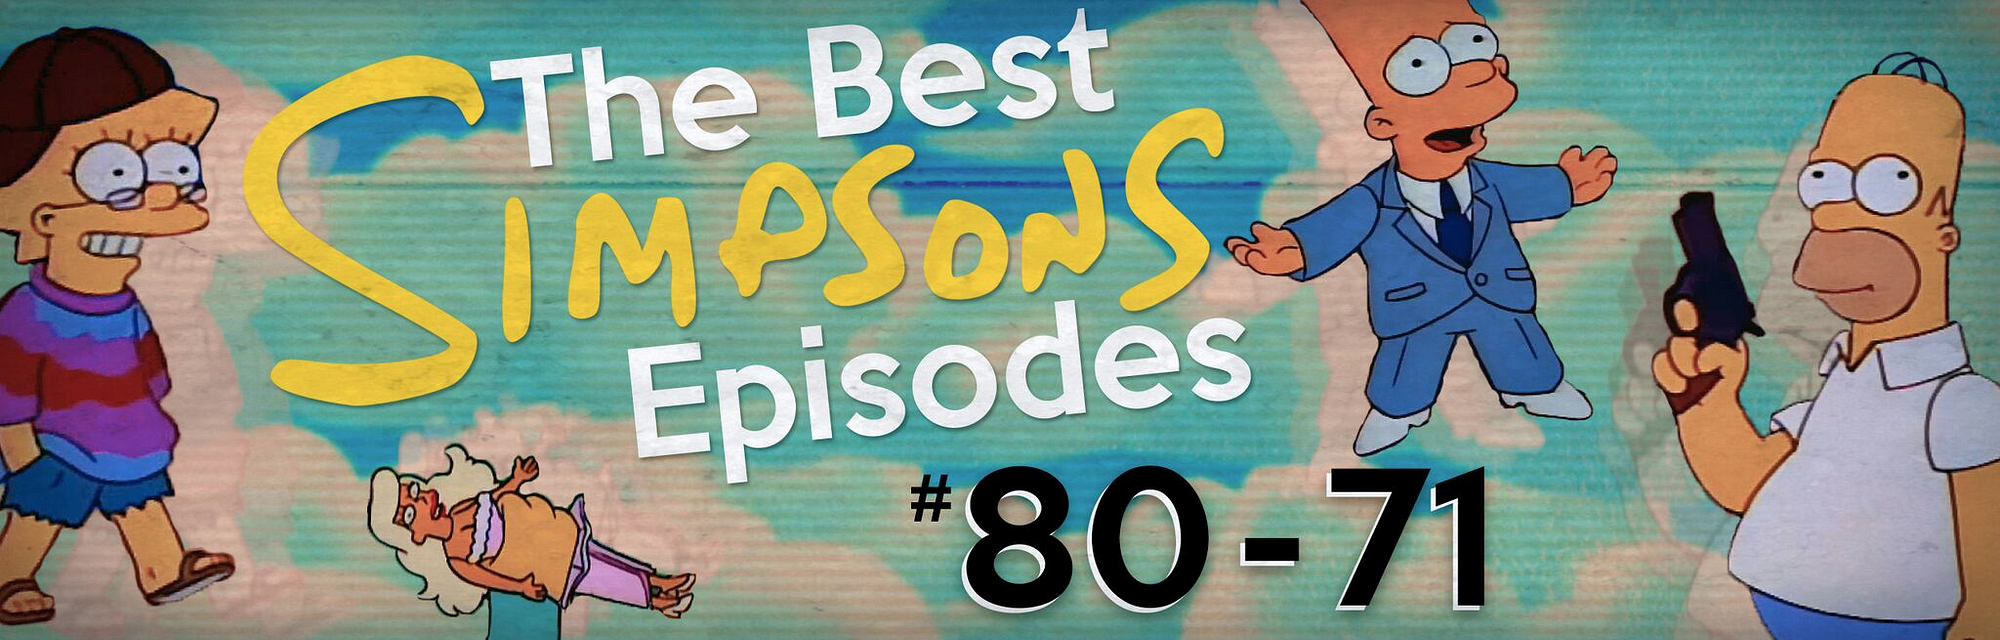 The Insiders Guide To The 100 Best ‘simpsons Episodes Ever 